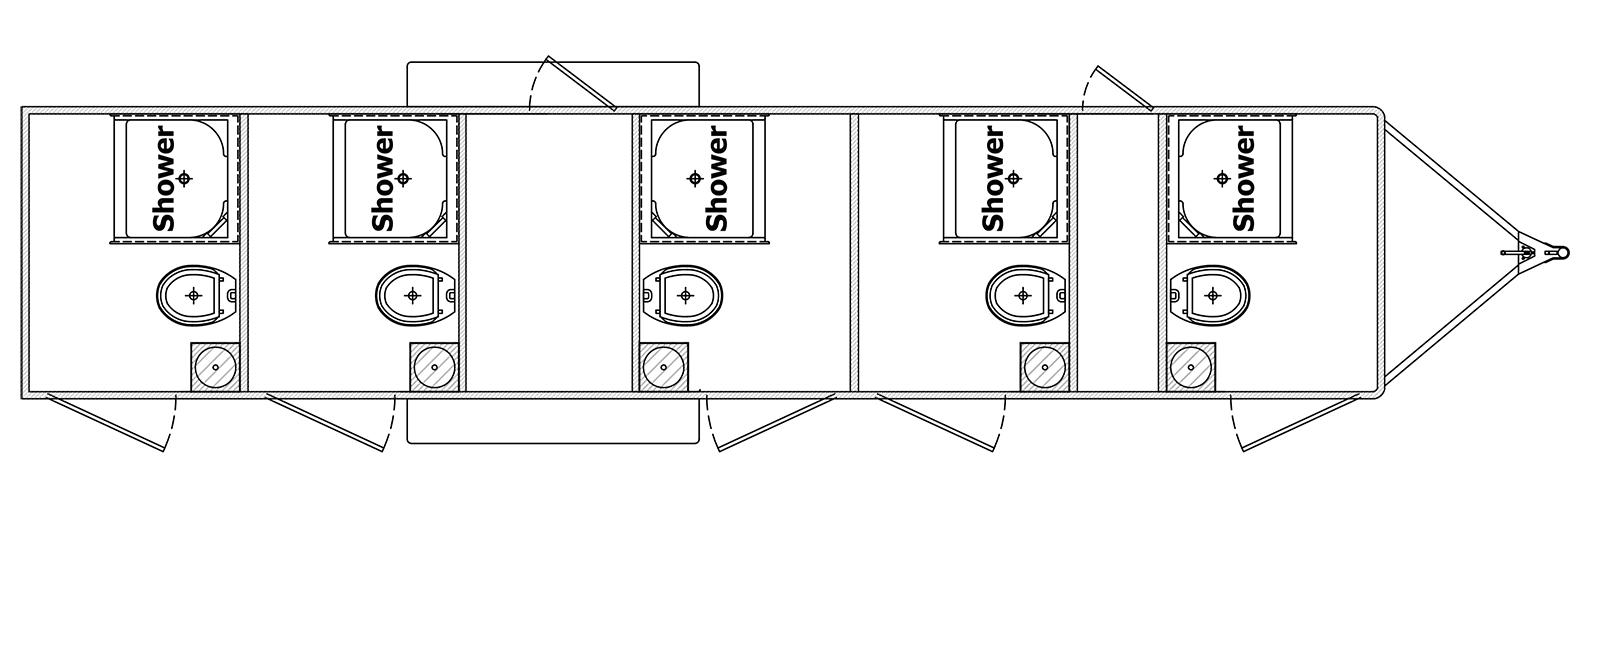 Century Series Century-V-Combo floorplan. The Century-V-Combo has  slide outs and one entry door.